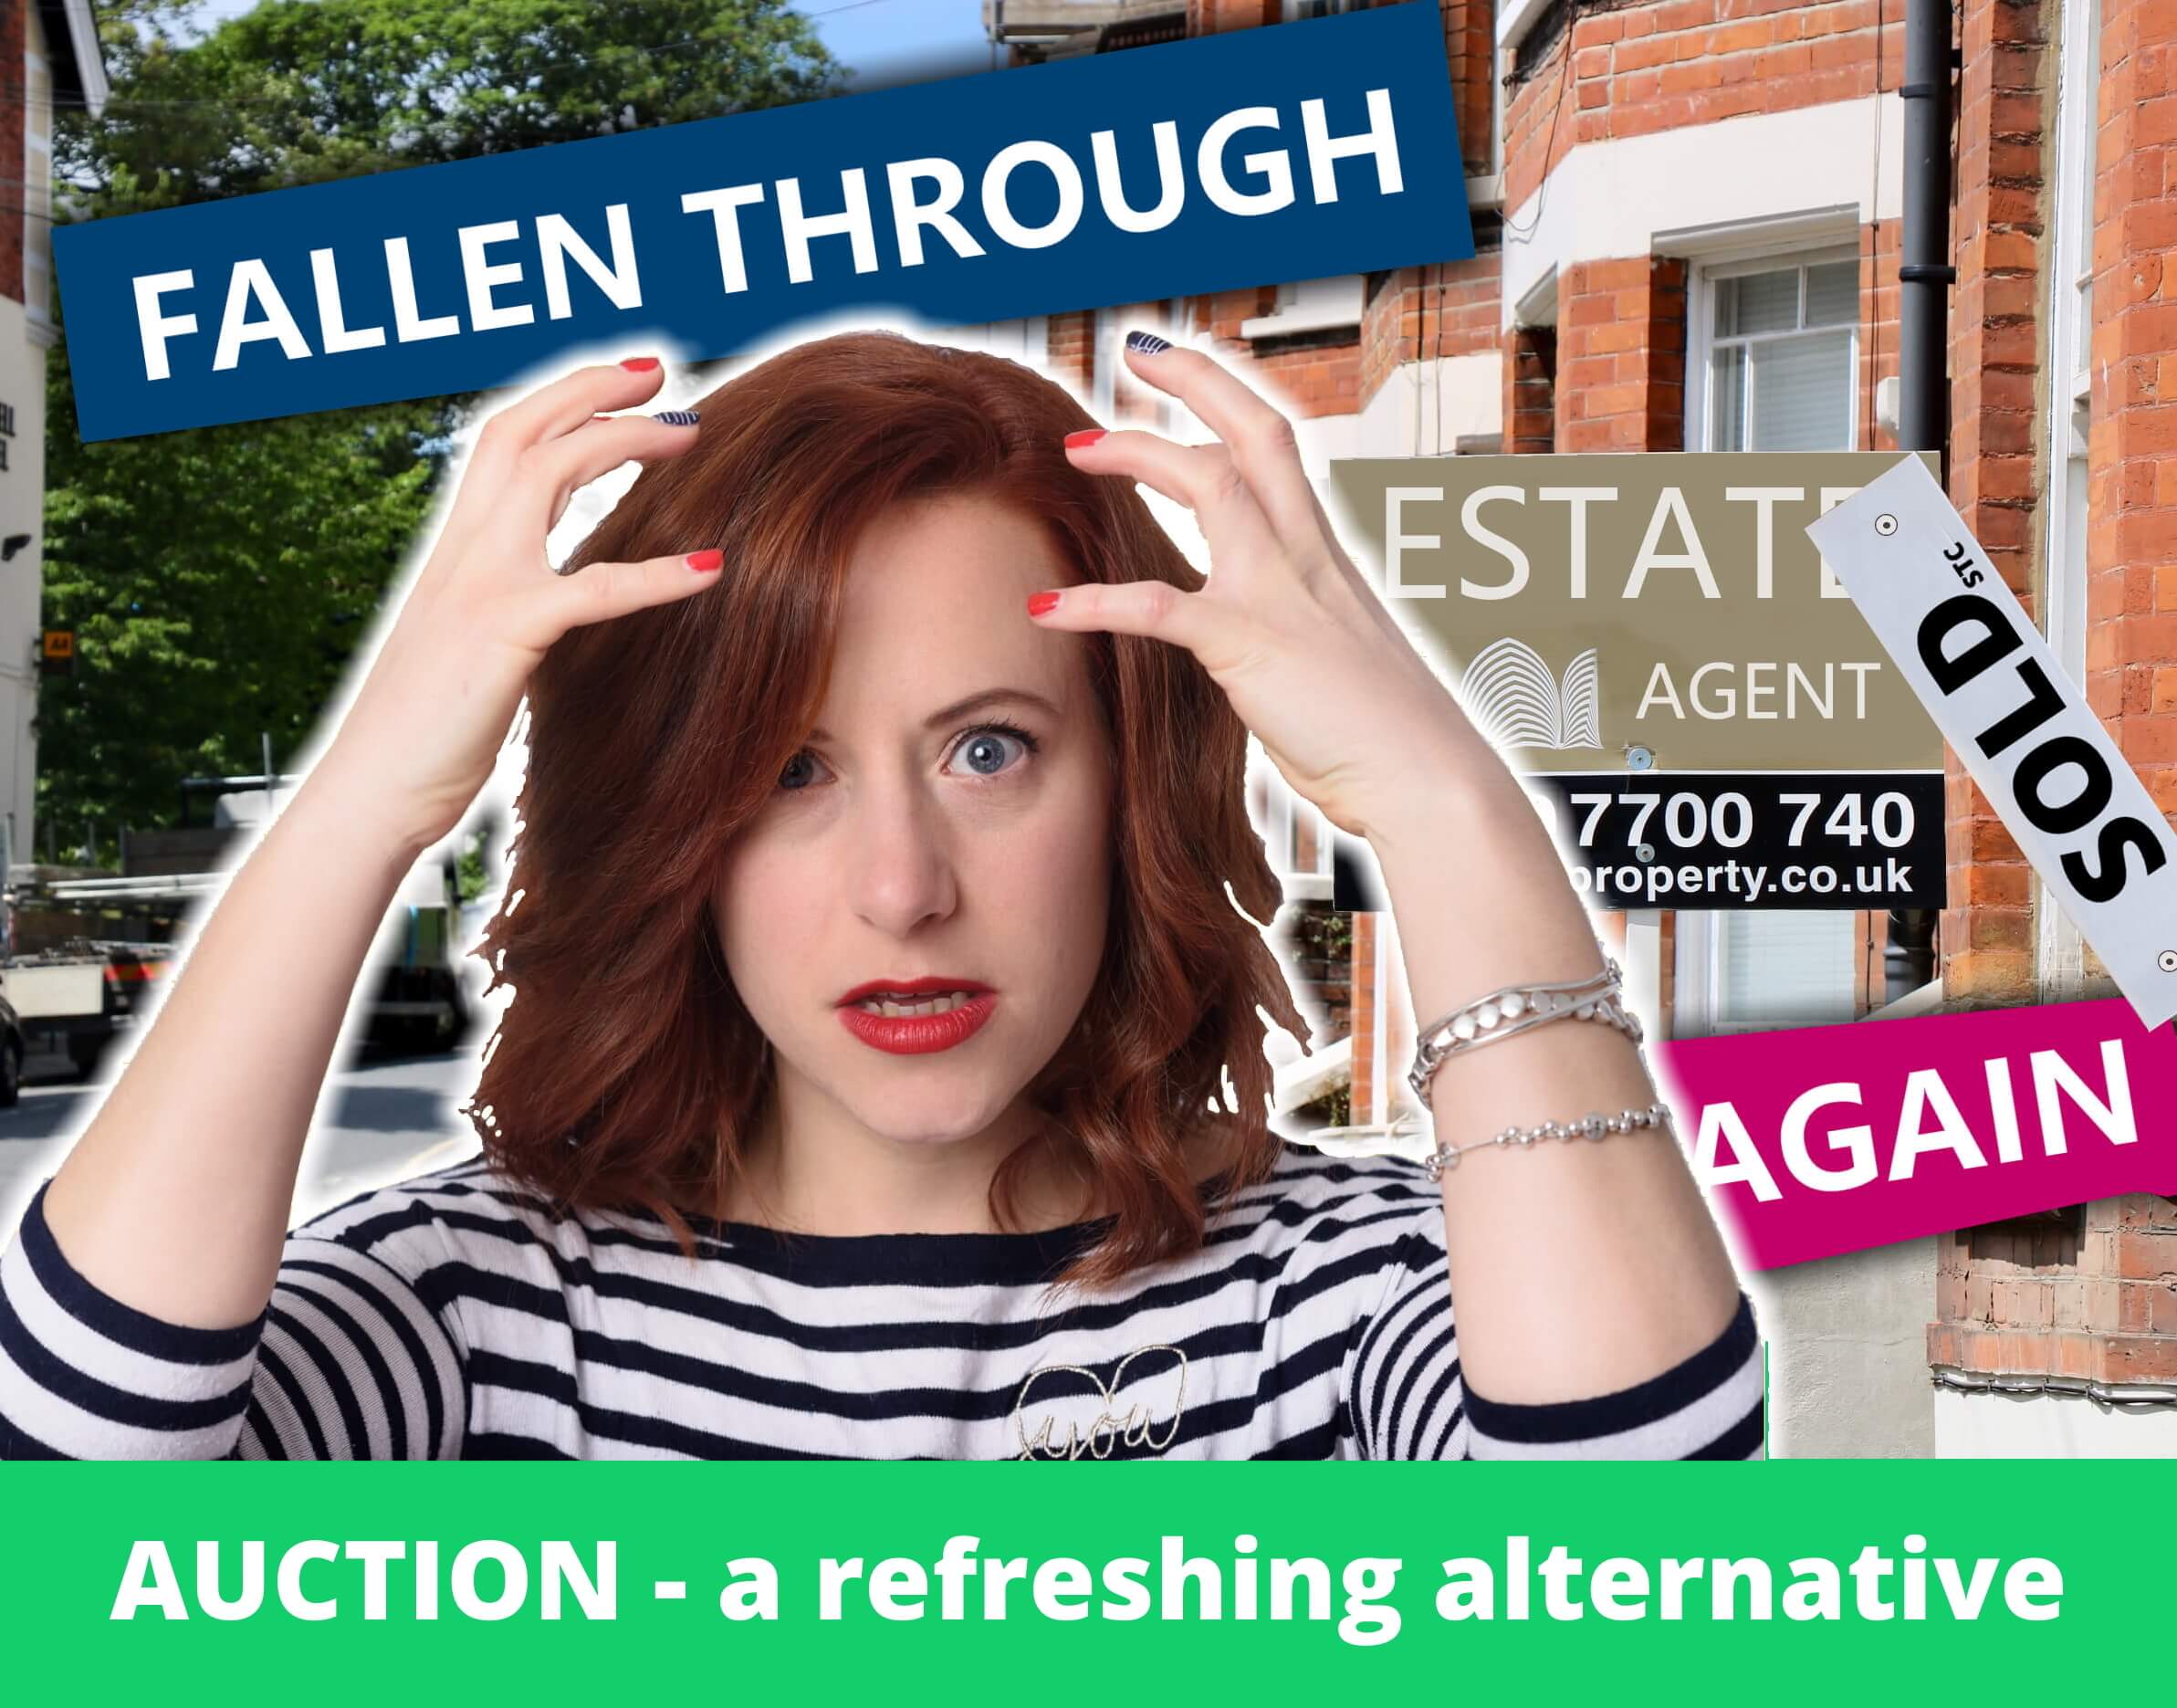 house sale fallen though -auction - a quick and refreshing alternative